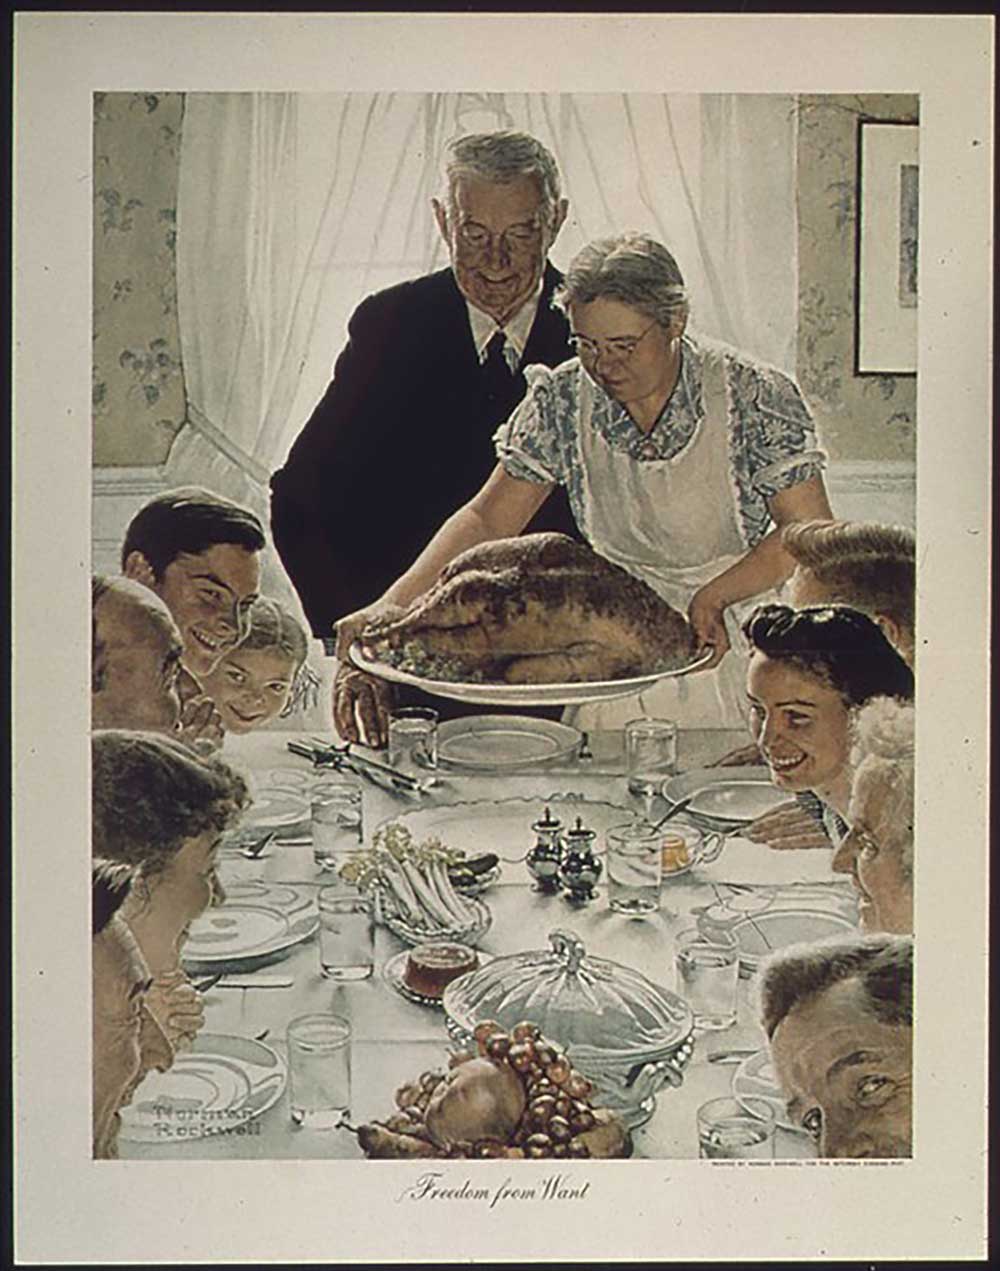 Norman Rockwell’s “Freedom From Want”